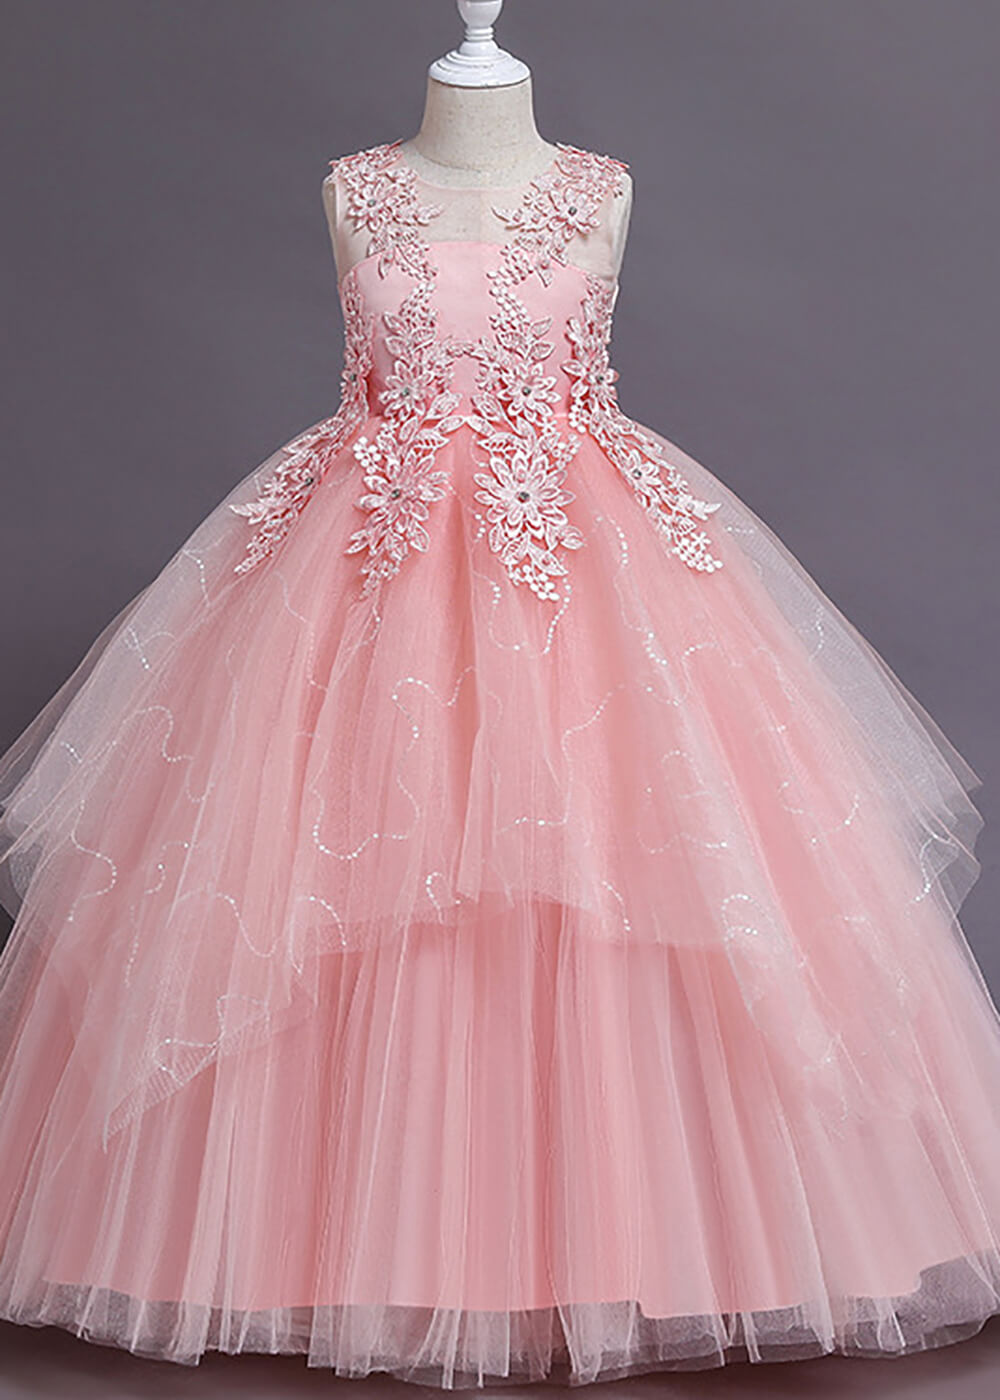 Illusion Neck V-back A-line Tulle Appliques Flower Girl Dress With Bow